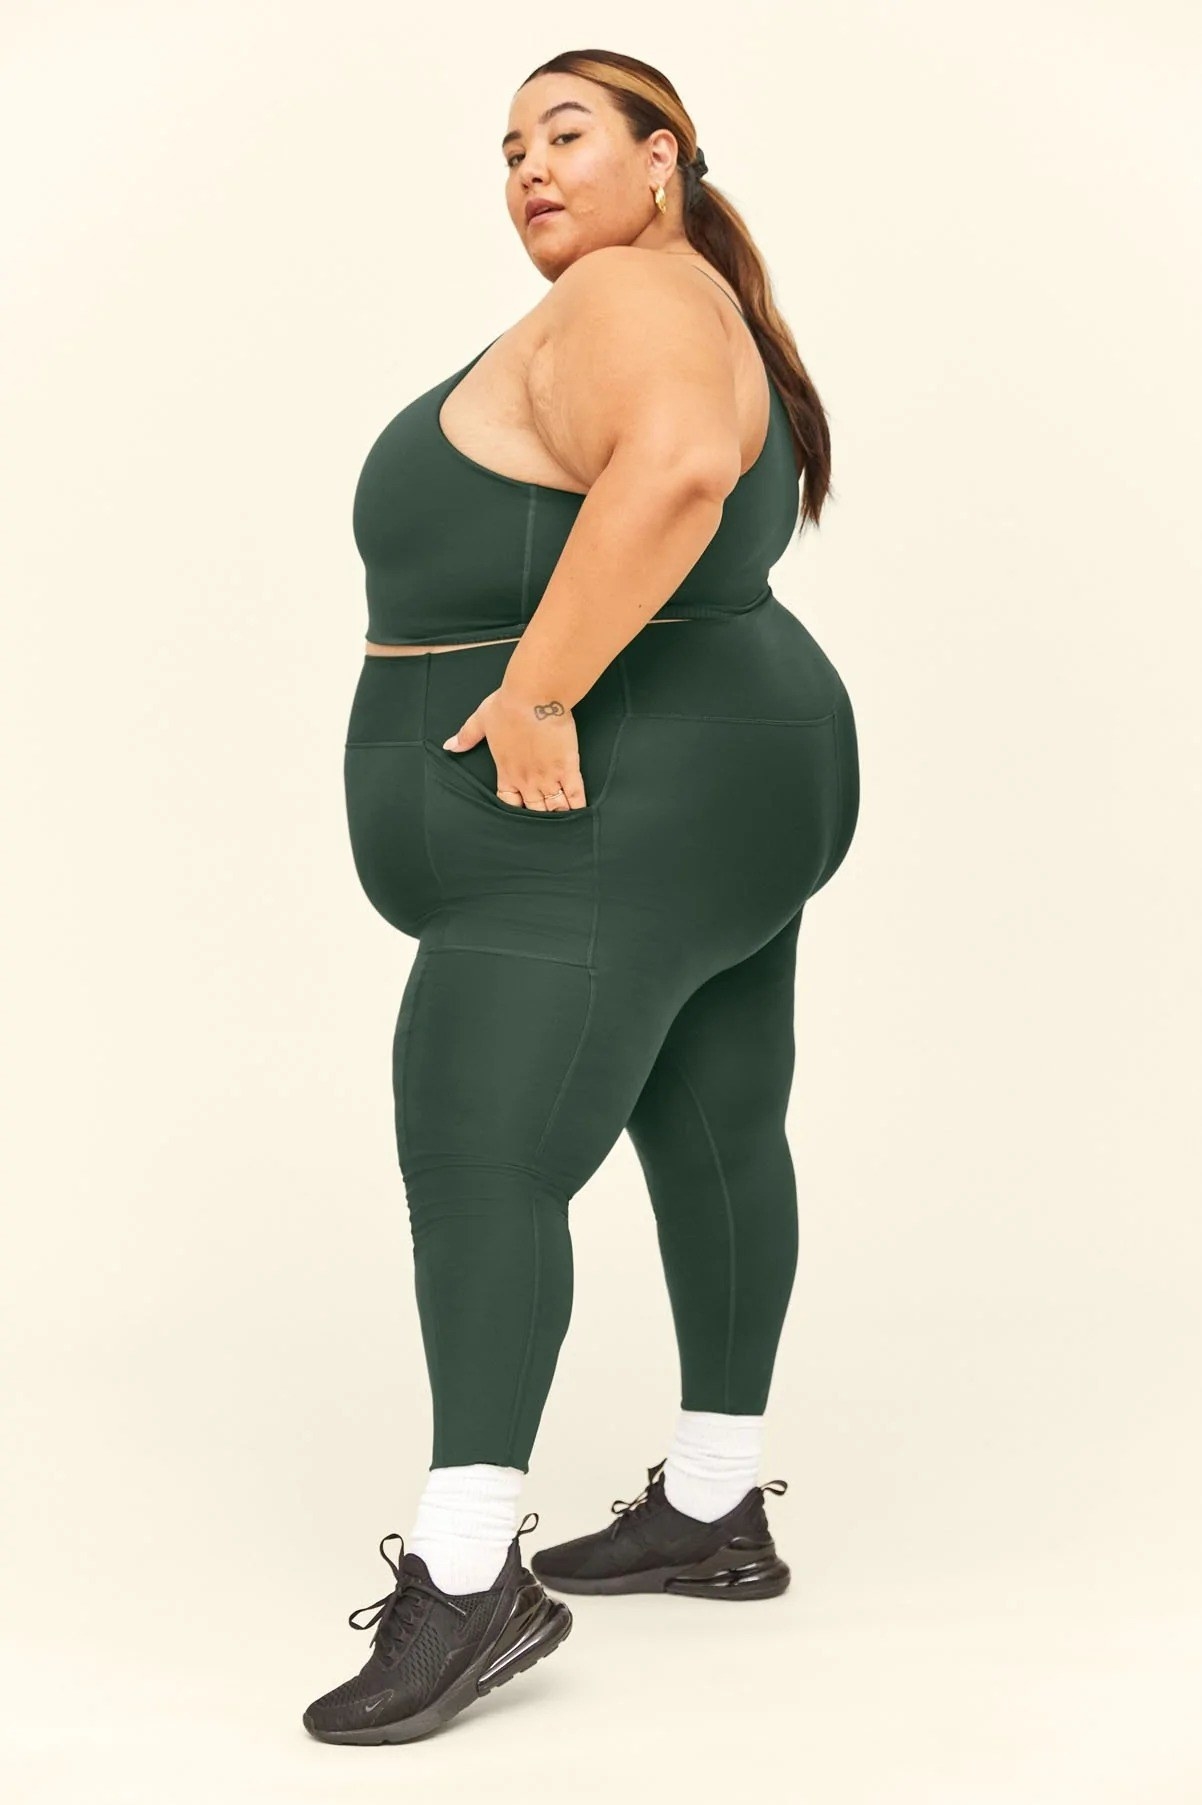 side view of model wearing the green pocket leggings with a matching sports bra, white socks, and black sneakers